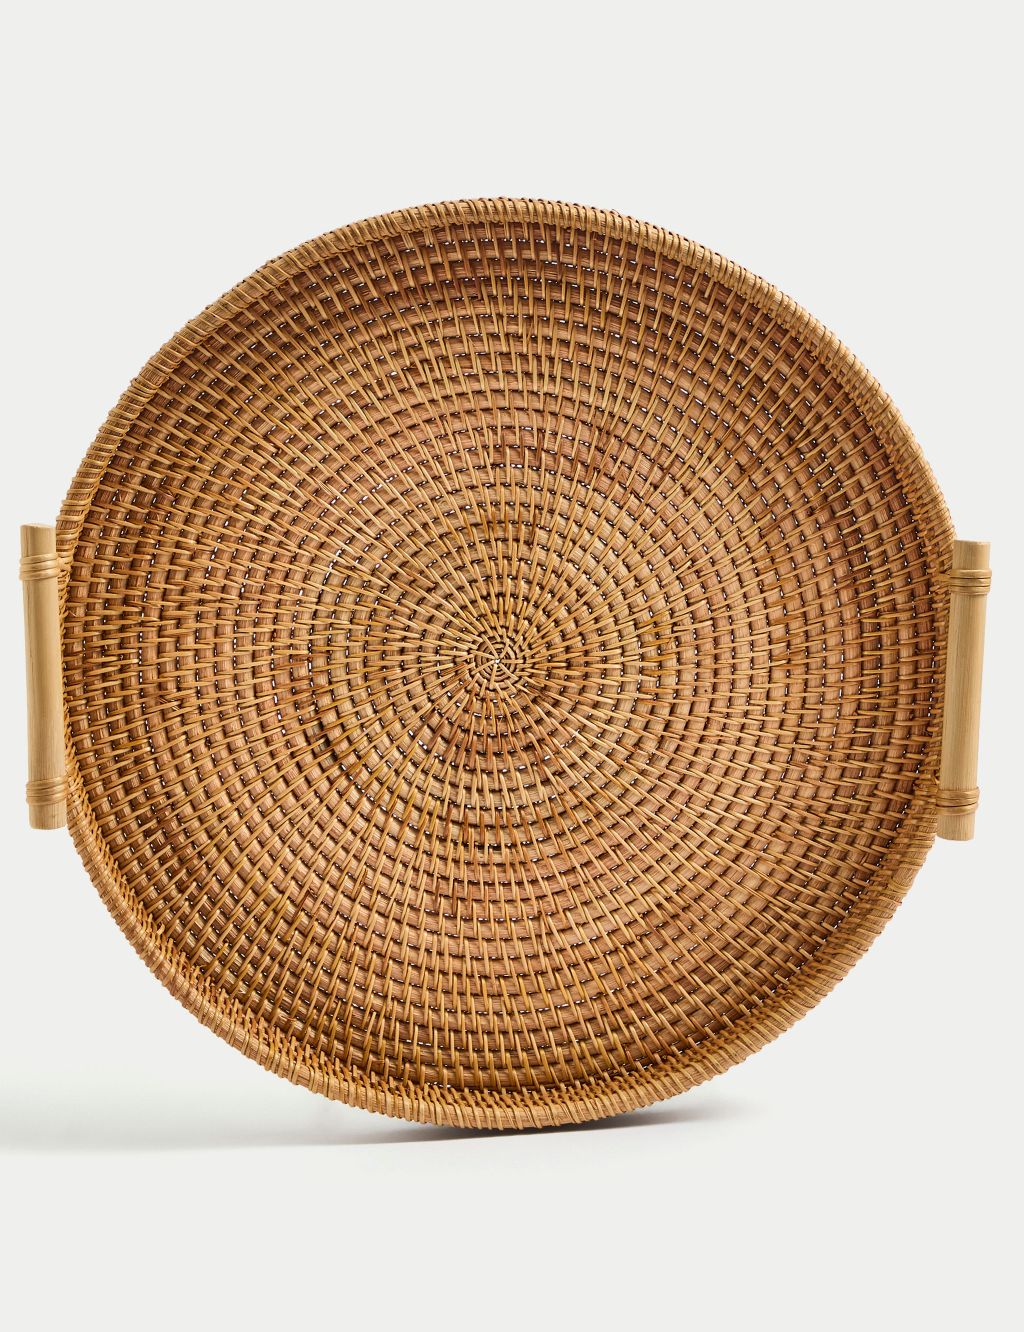 Rattan Tray 1 of 4